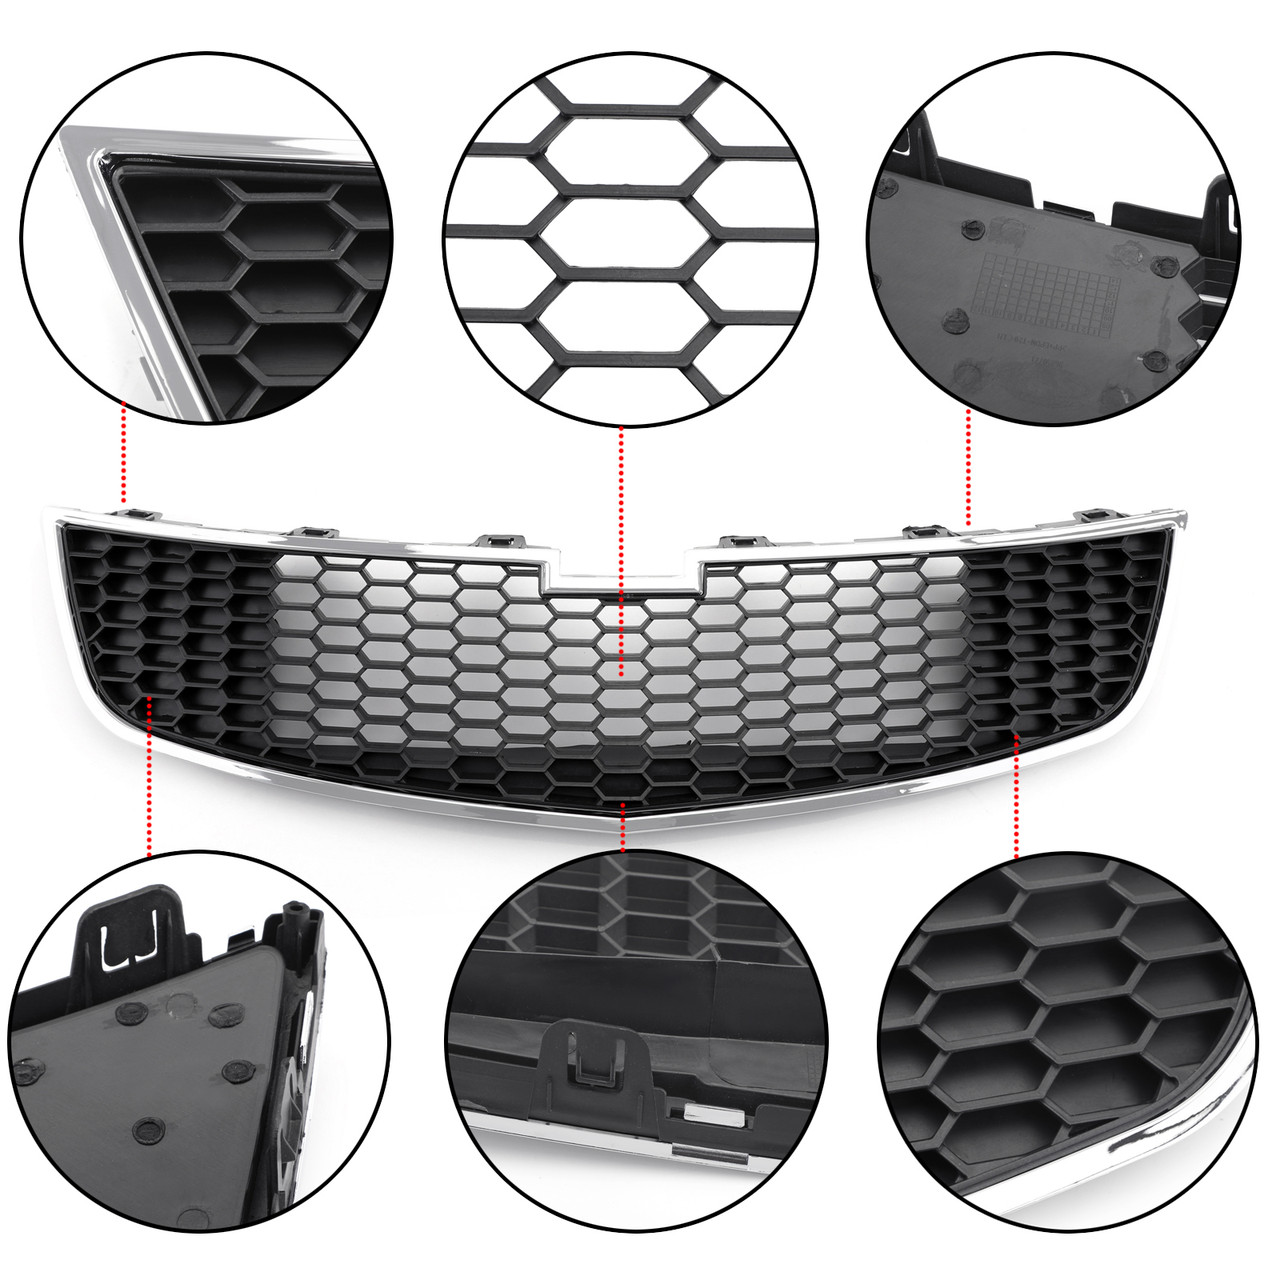 2PC Front Bumper Upper + Lower Grille Inserts Trim Covers For Chevrolet Cruze 2009-2014 Black